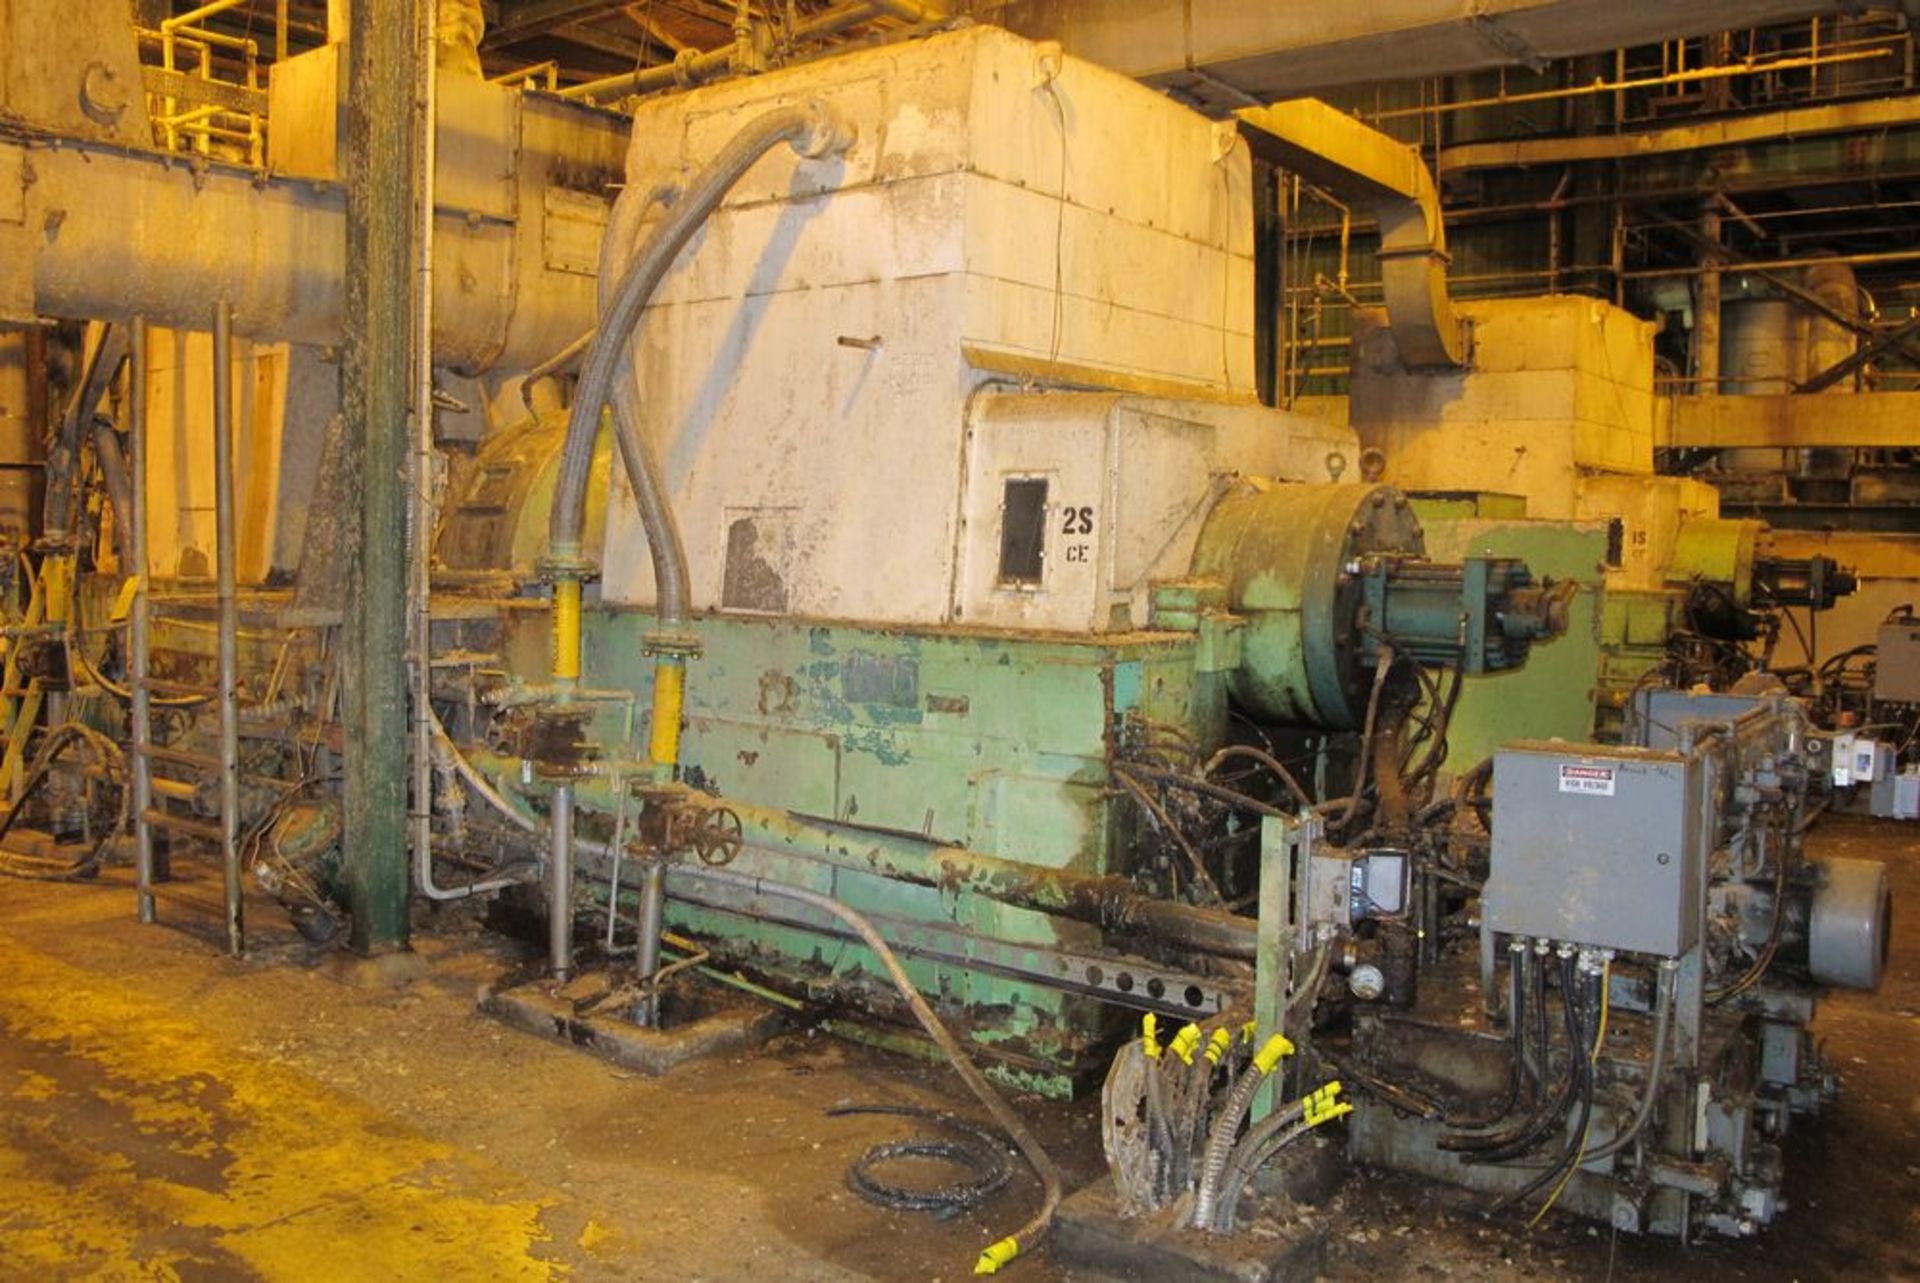 C E BAUER PRESSURIZED SECONDARY REFINER #2 489-6/485-6 INCL HYDRAULIC POWER PACK AND LUBE SYSTEM,